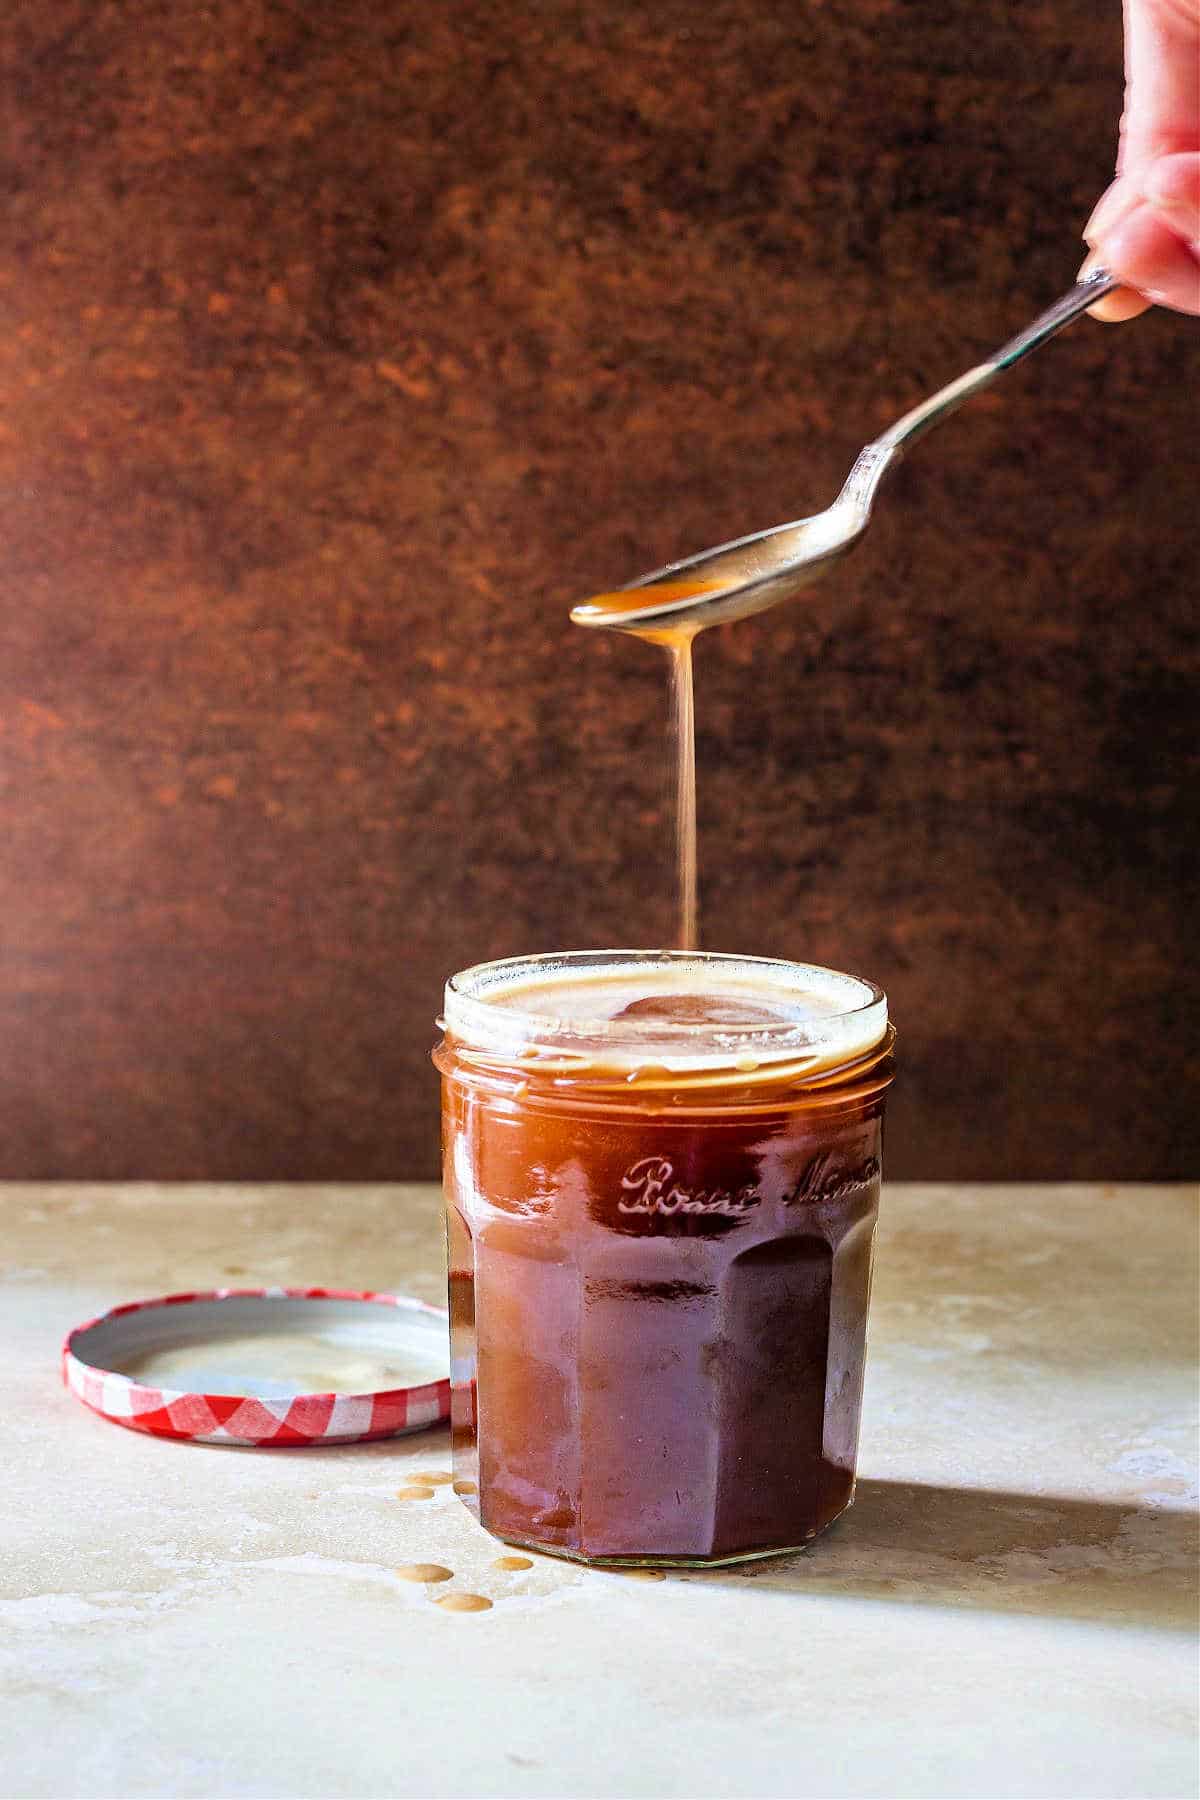 An open and full jar of butterscotch syrup with the lid next to it. There's a hand holding a spoon with syrup dripping down into the open jar.